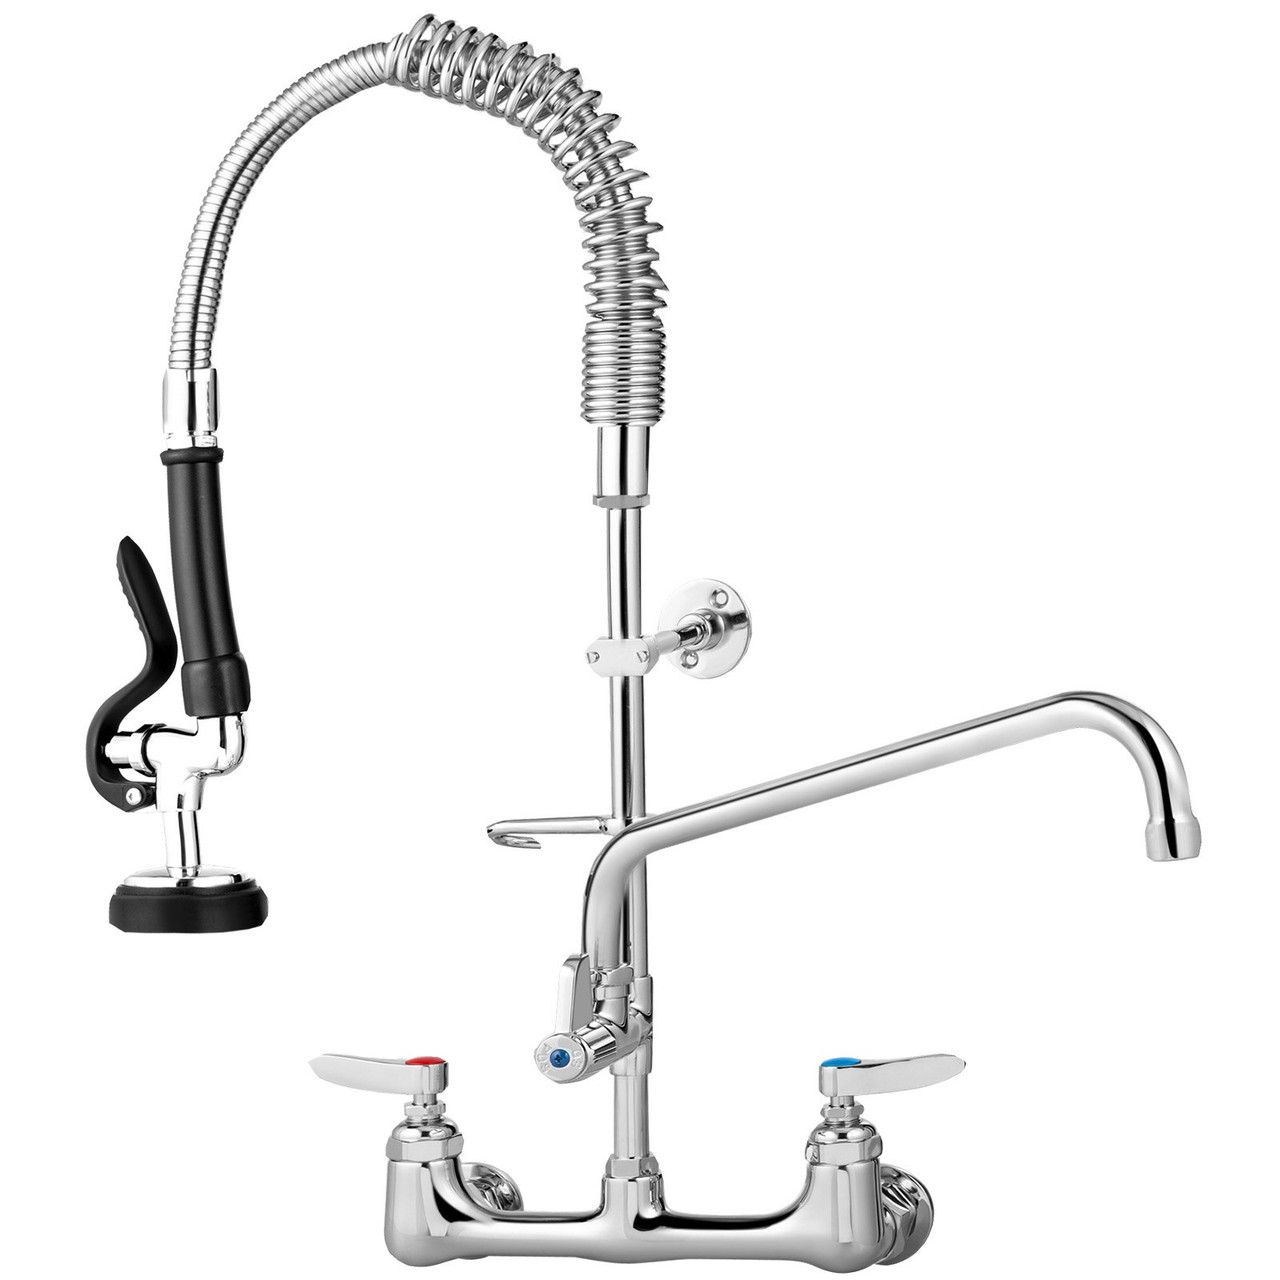 Commercial Faucet with Pre-Rinse Sprayer, 8" Adjustable Center Wall Mount Kitchen Faucet with 12" Swivel Spout, 21" Height Compartment Sink Faucet for Industrial Restaurant, Lead-Free Brass